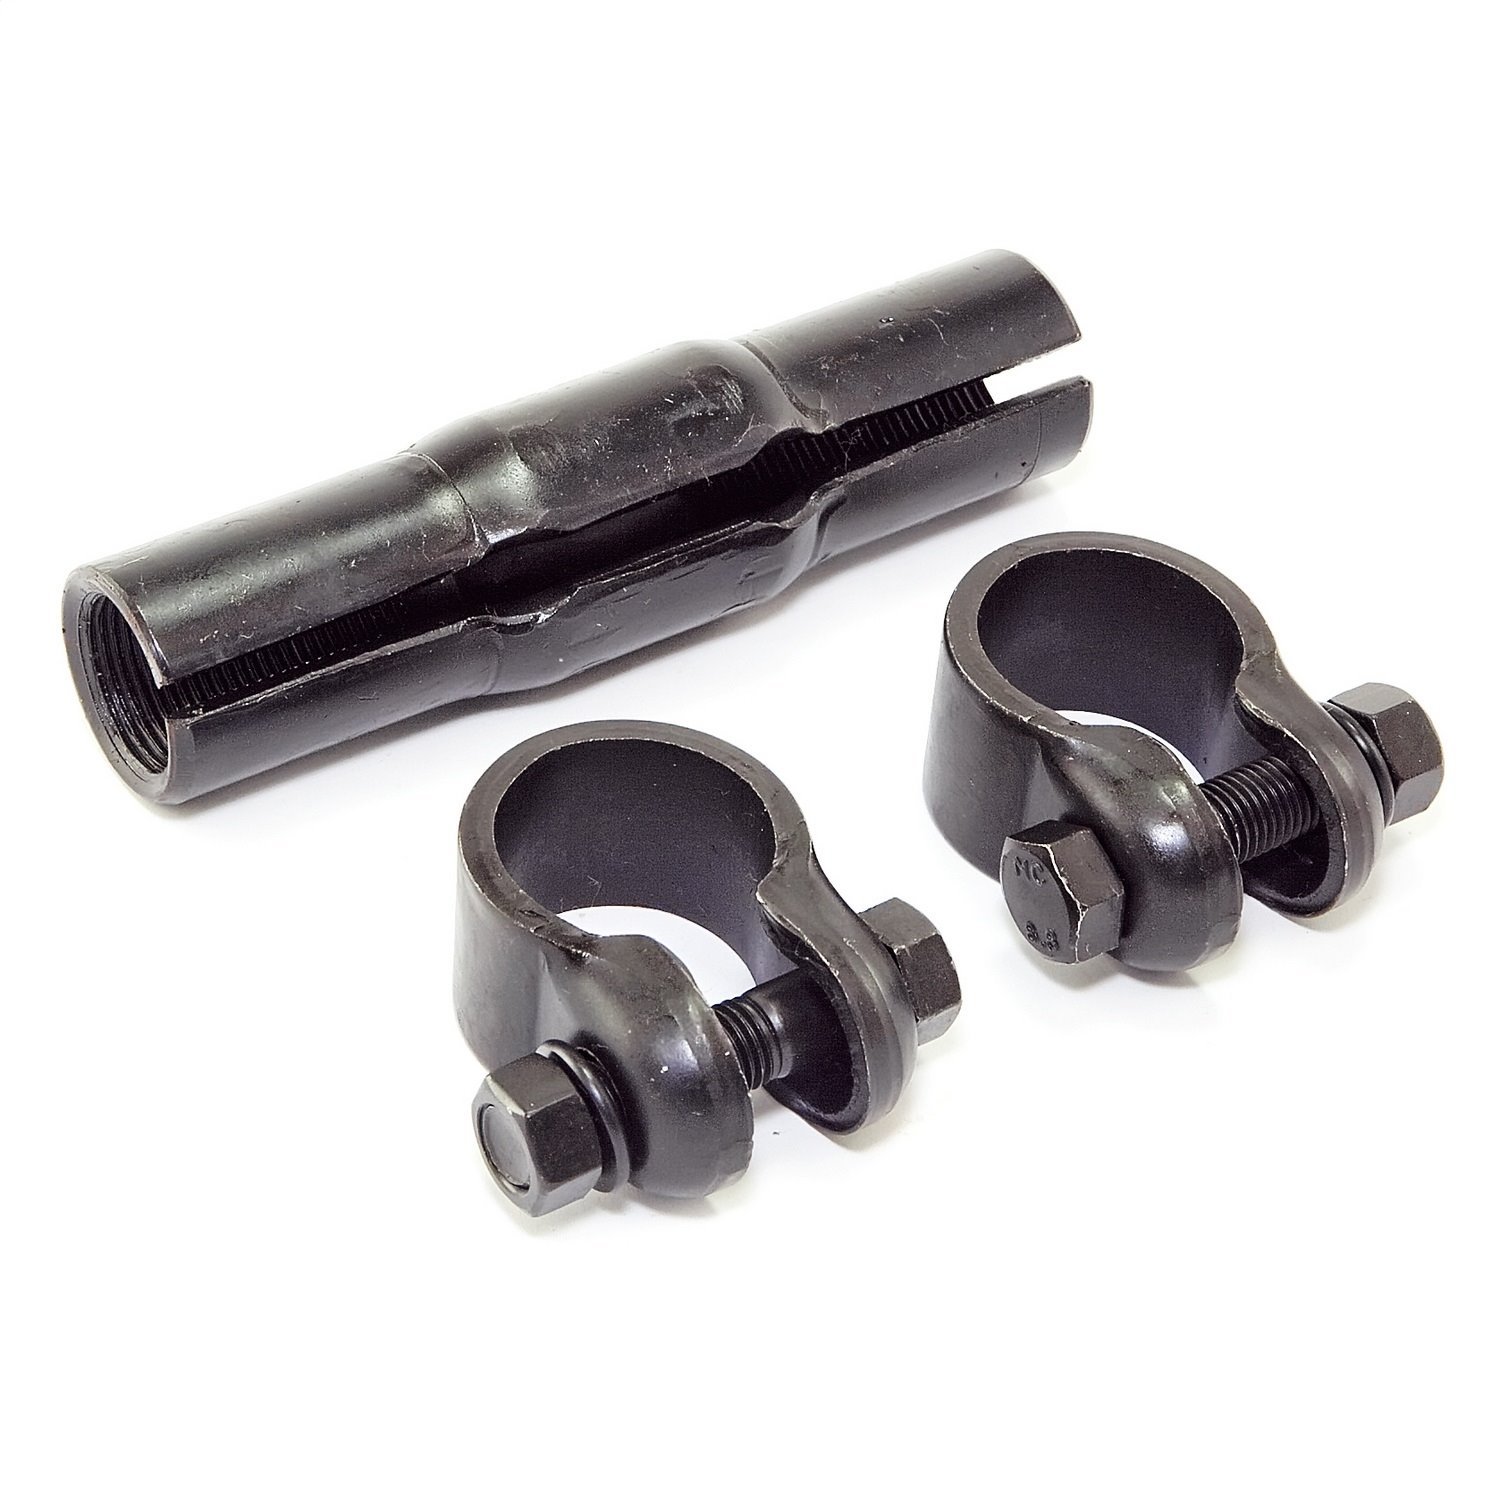 This tie rod adjustment sleeve from Omix-ADA fits